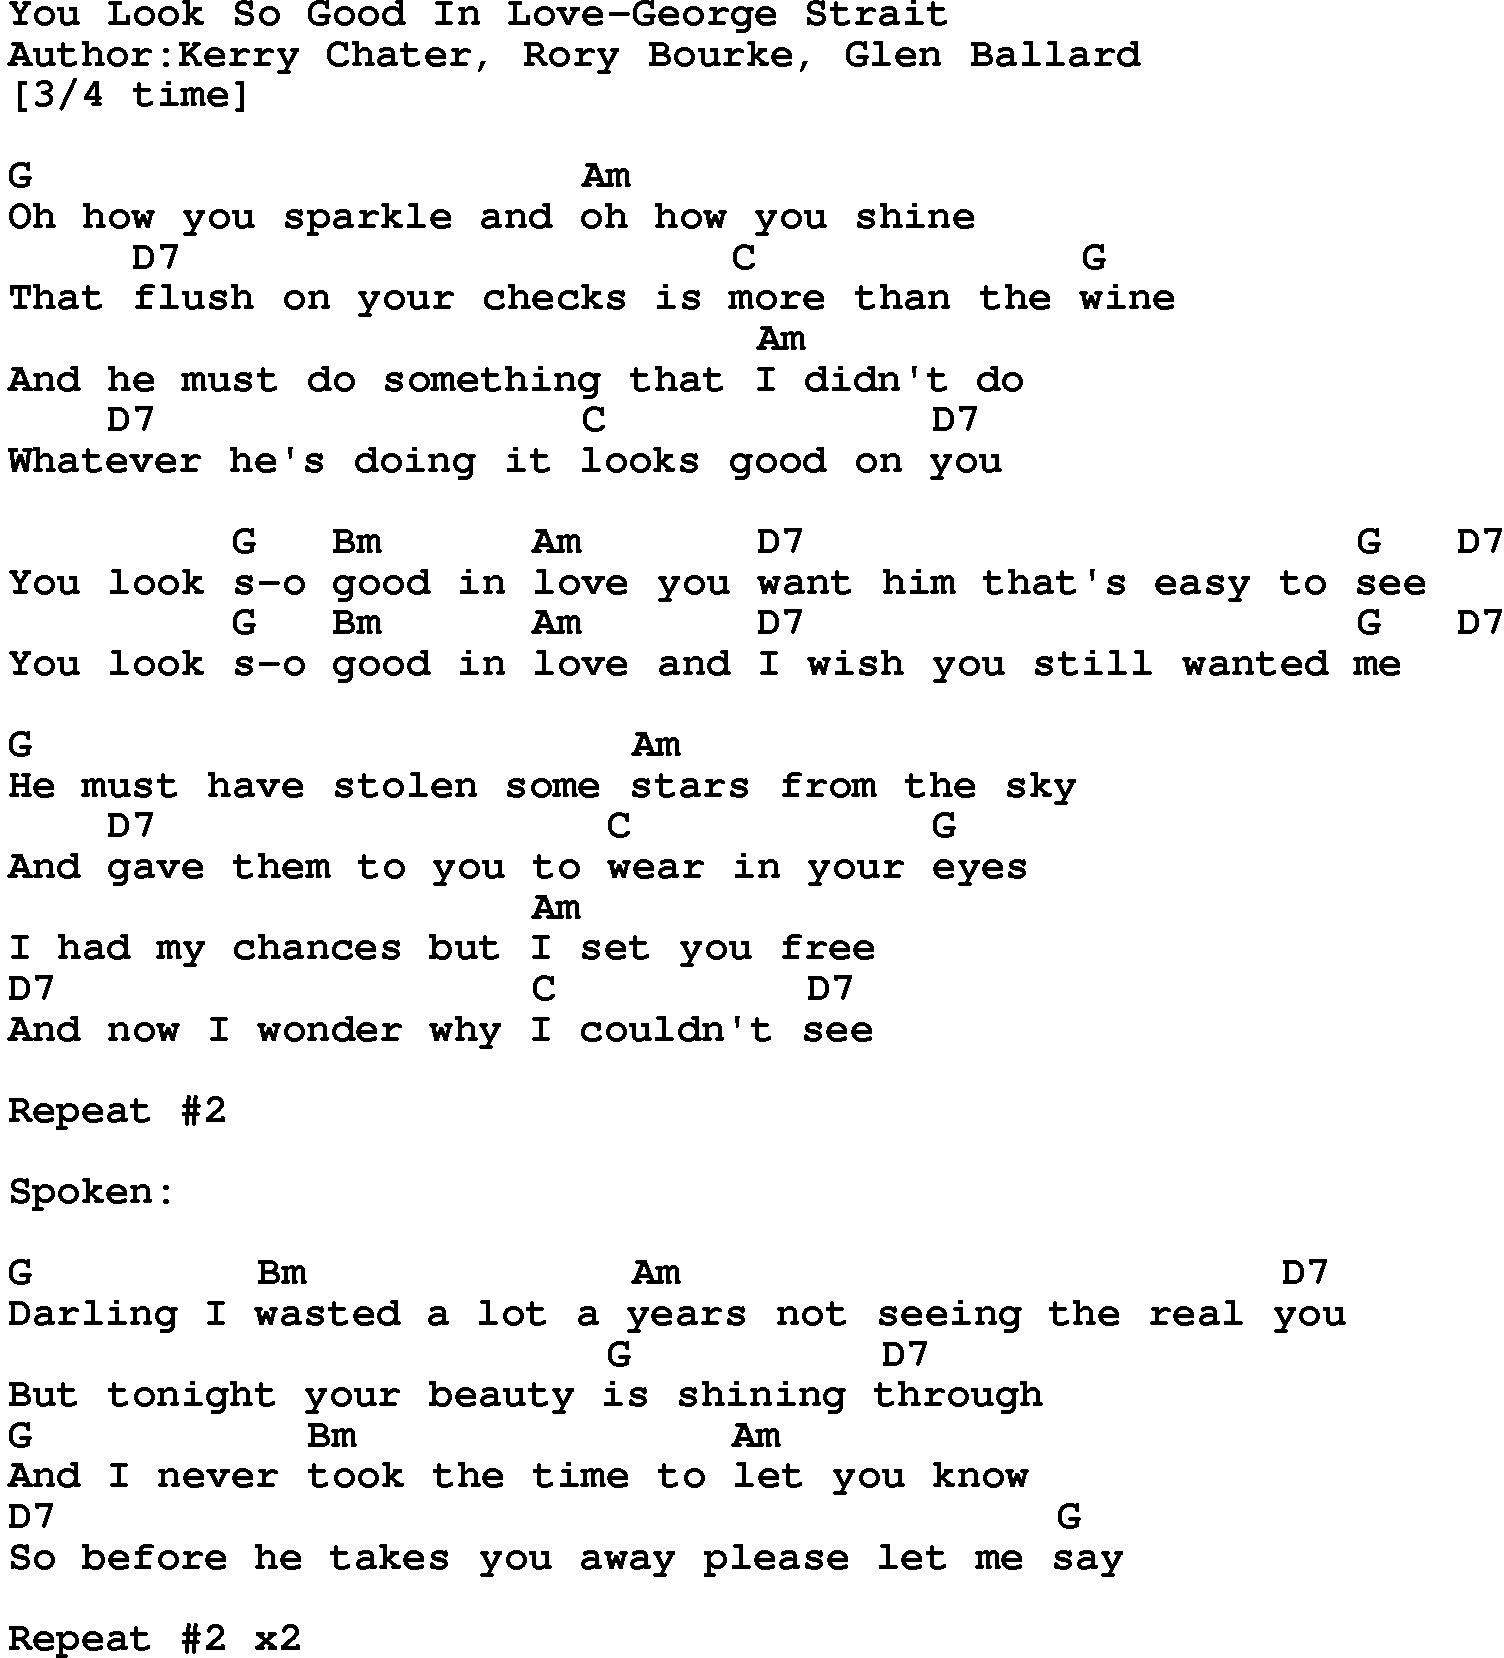 Country music song: You Look So Good In Love-George Strait lyrics and chords